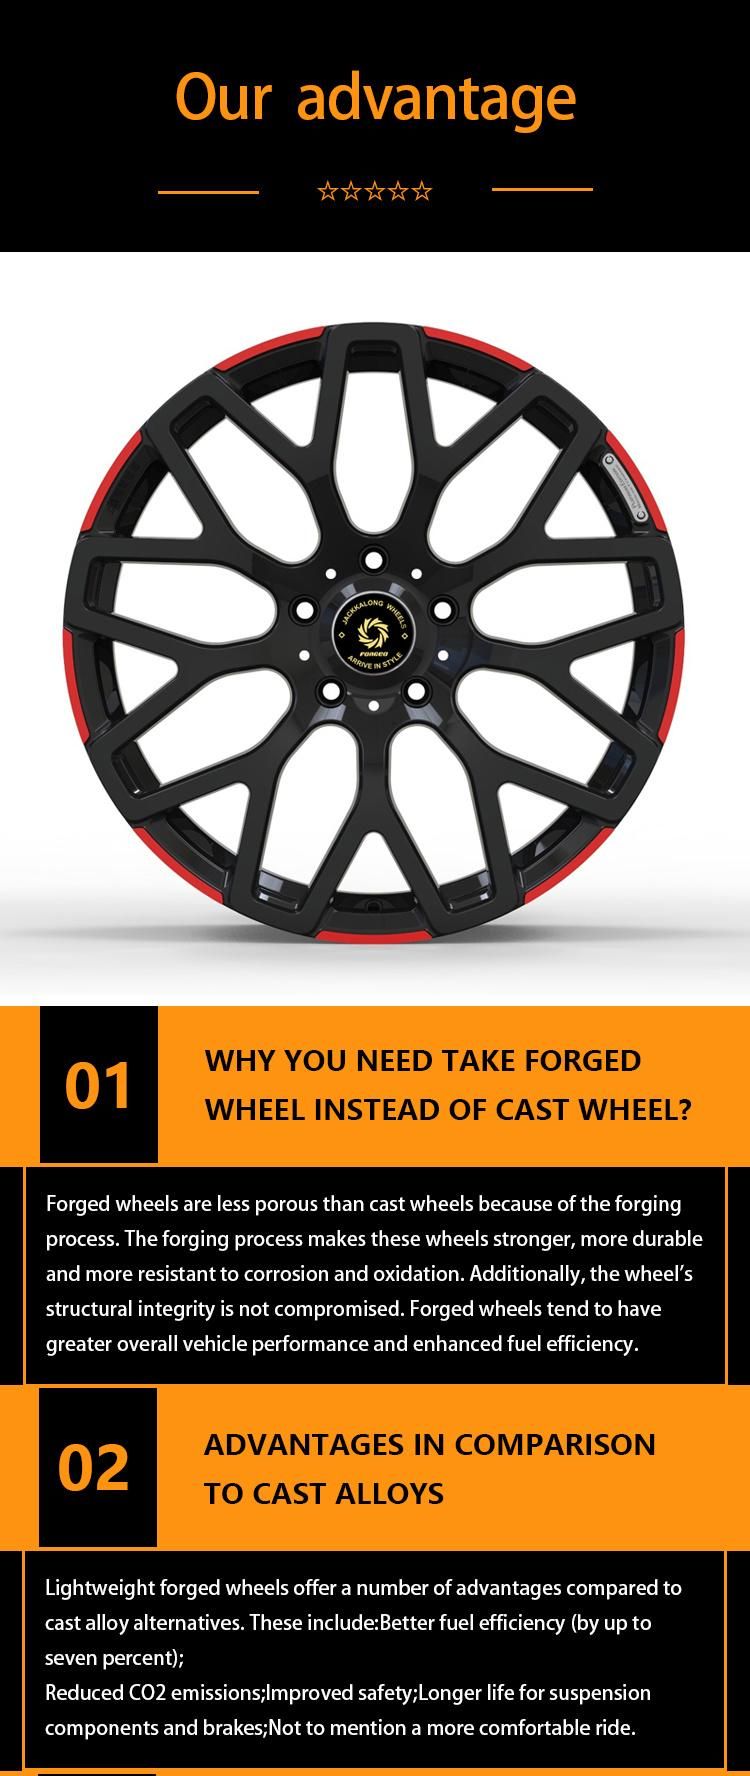 1 Piece Monoblock Forged T6061 Alloy Rims Wheels for Customized T6061 Material with Mag Rims with Gloss Black +Orange Finish Color 